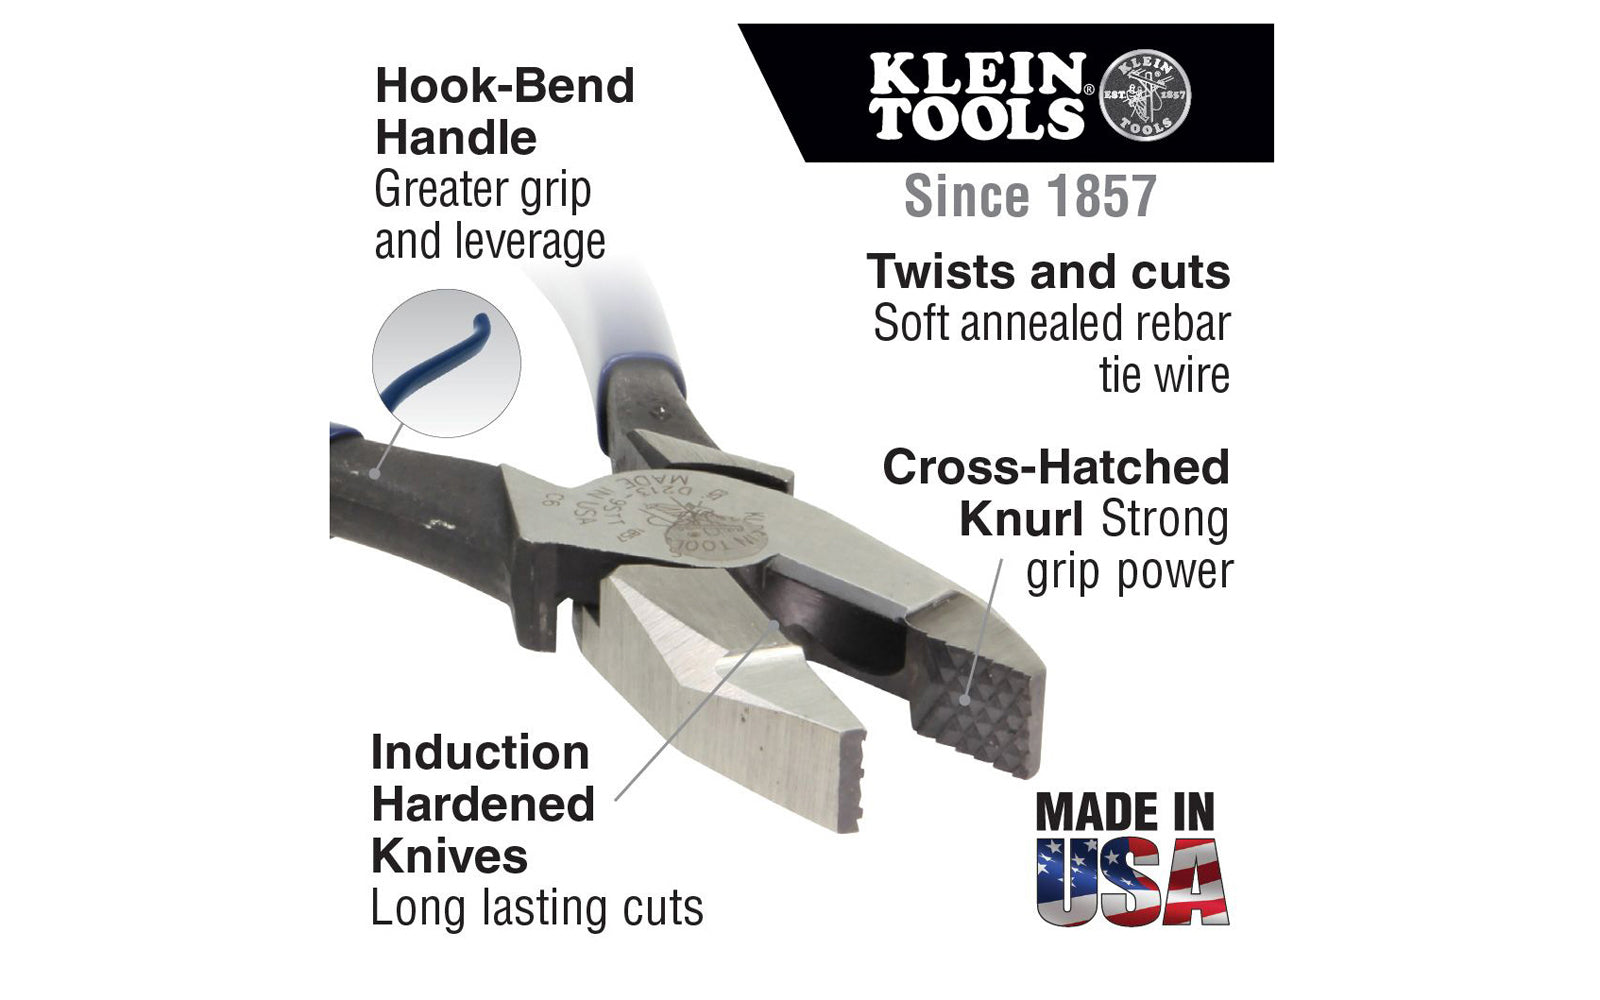 Klein Tools 9-1/4" Ironworker's Pliers "Heavy Duty" D2000-9ST cuts ACSR, screws, nails & most hardened wire. It can twist & cut soft annealed rebar tie wire as well. It has a high-leverage design; rivet is closer to the cutting edge for 46-Percent greater cutting & gripping power. 9-1/4" overall length. 092644703829